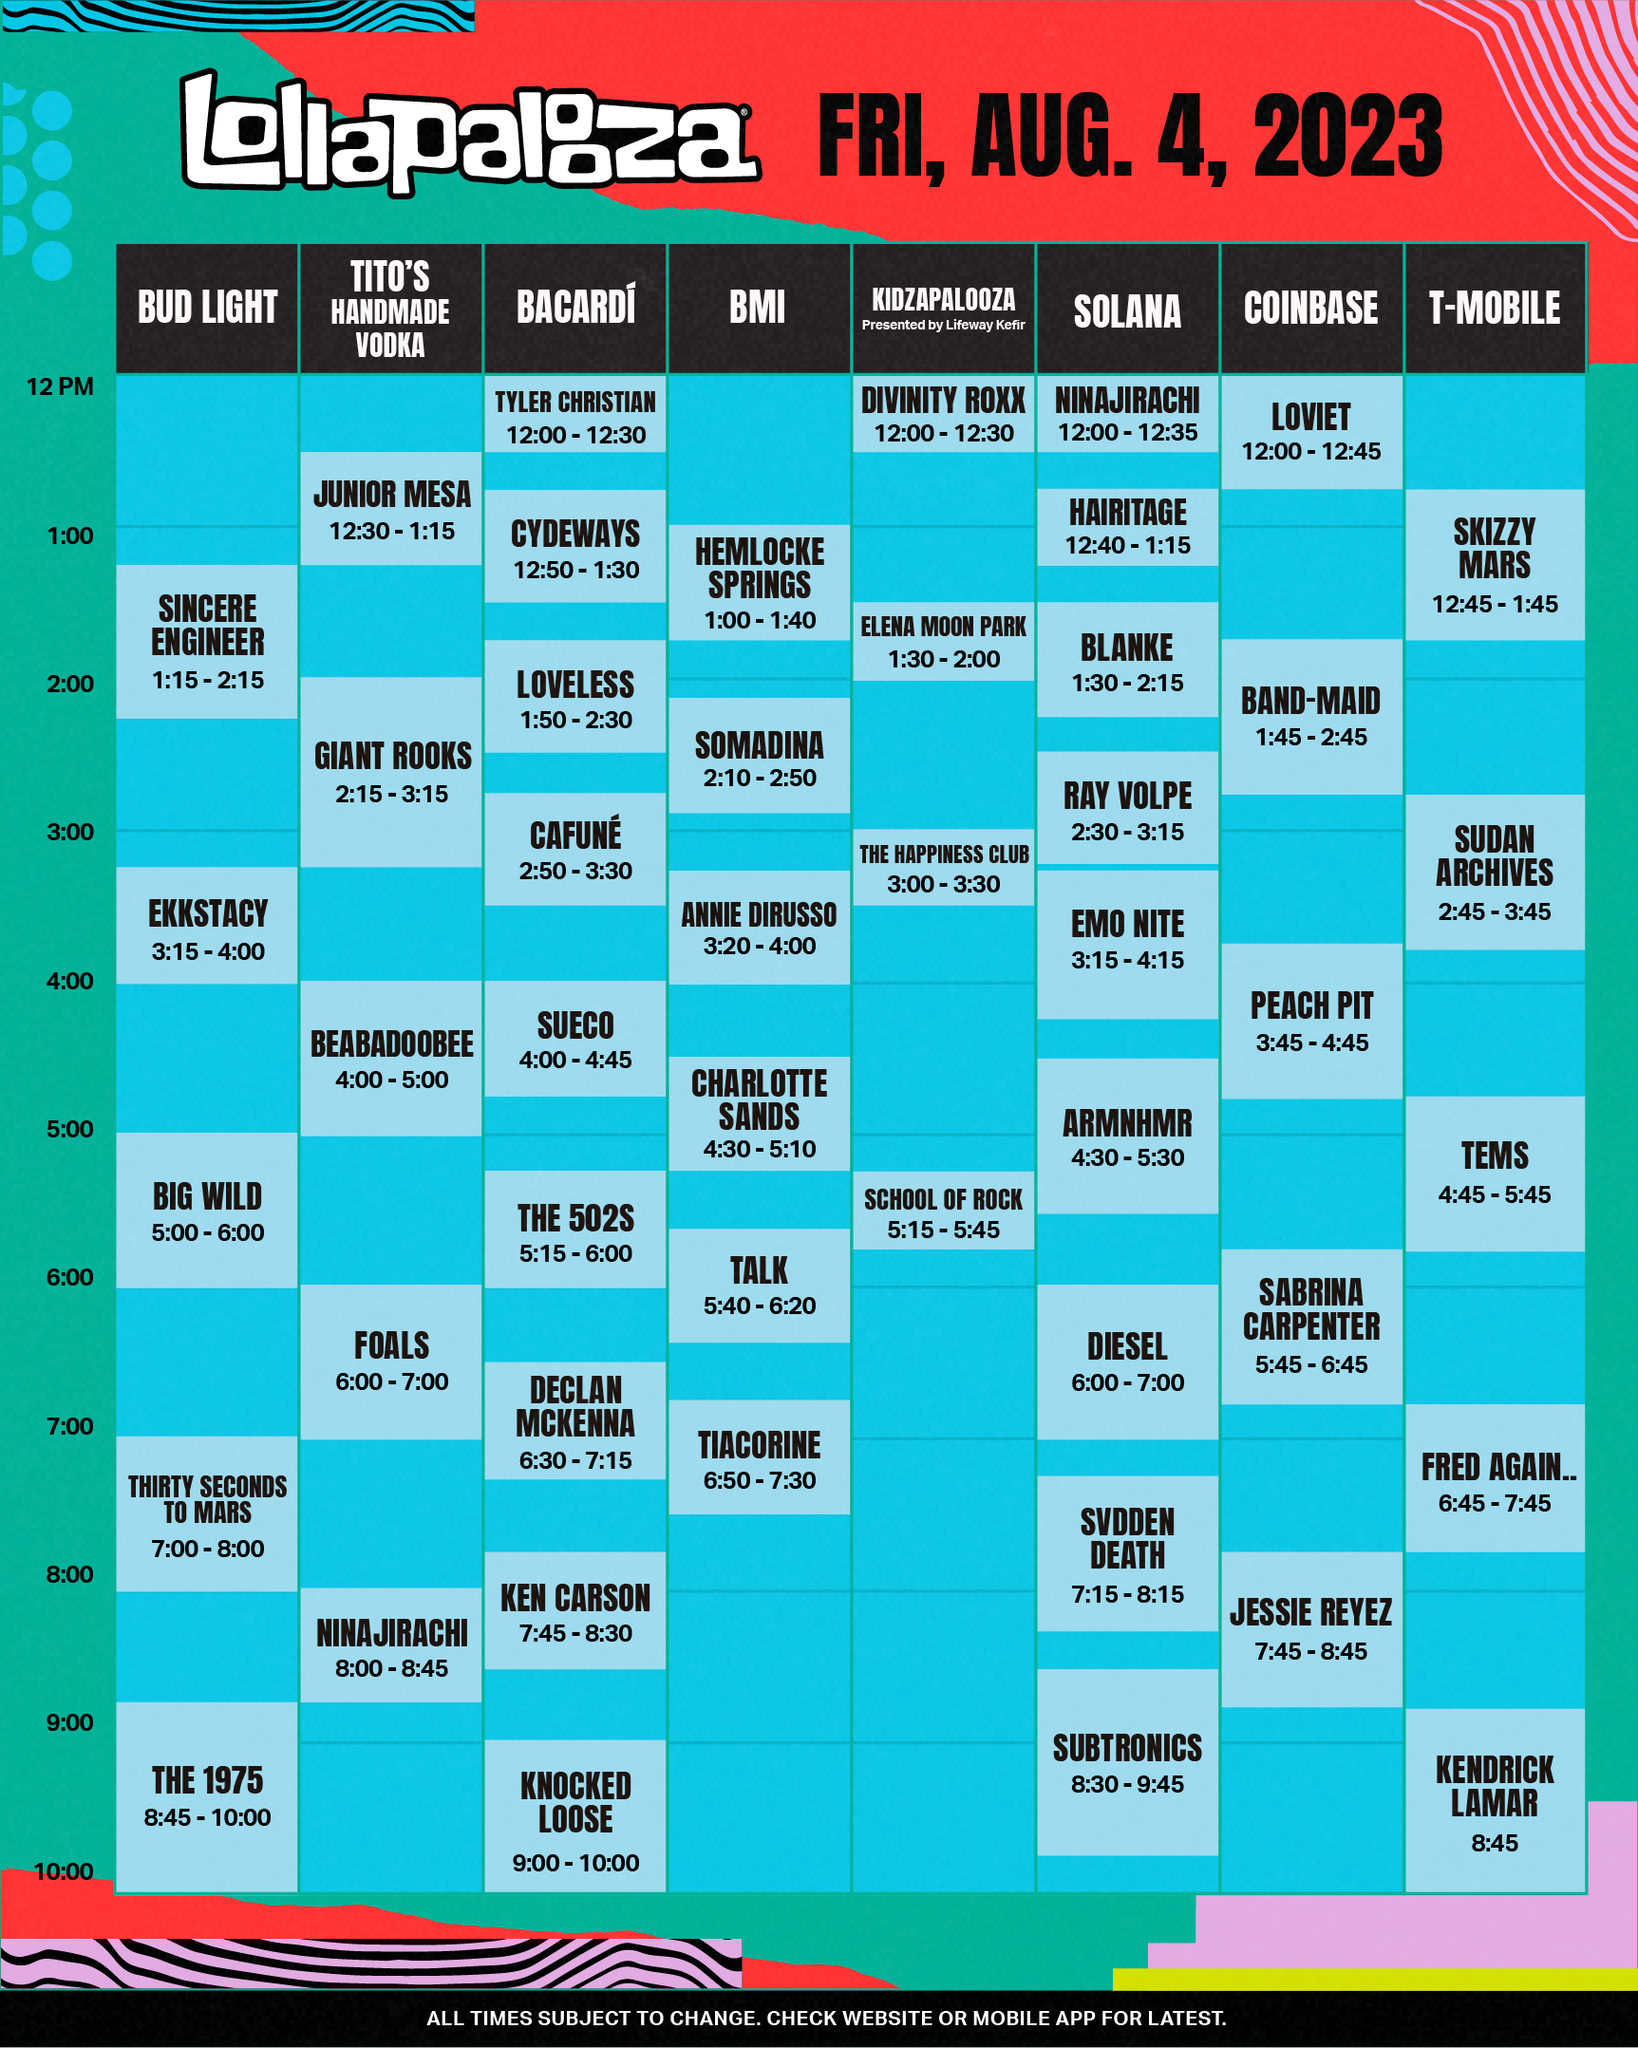 2023 Lollapalooza Schedule Announced! 2